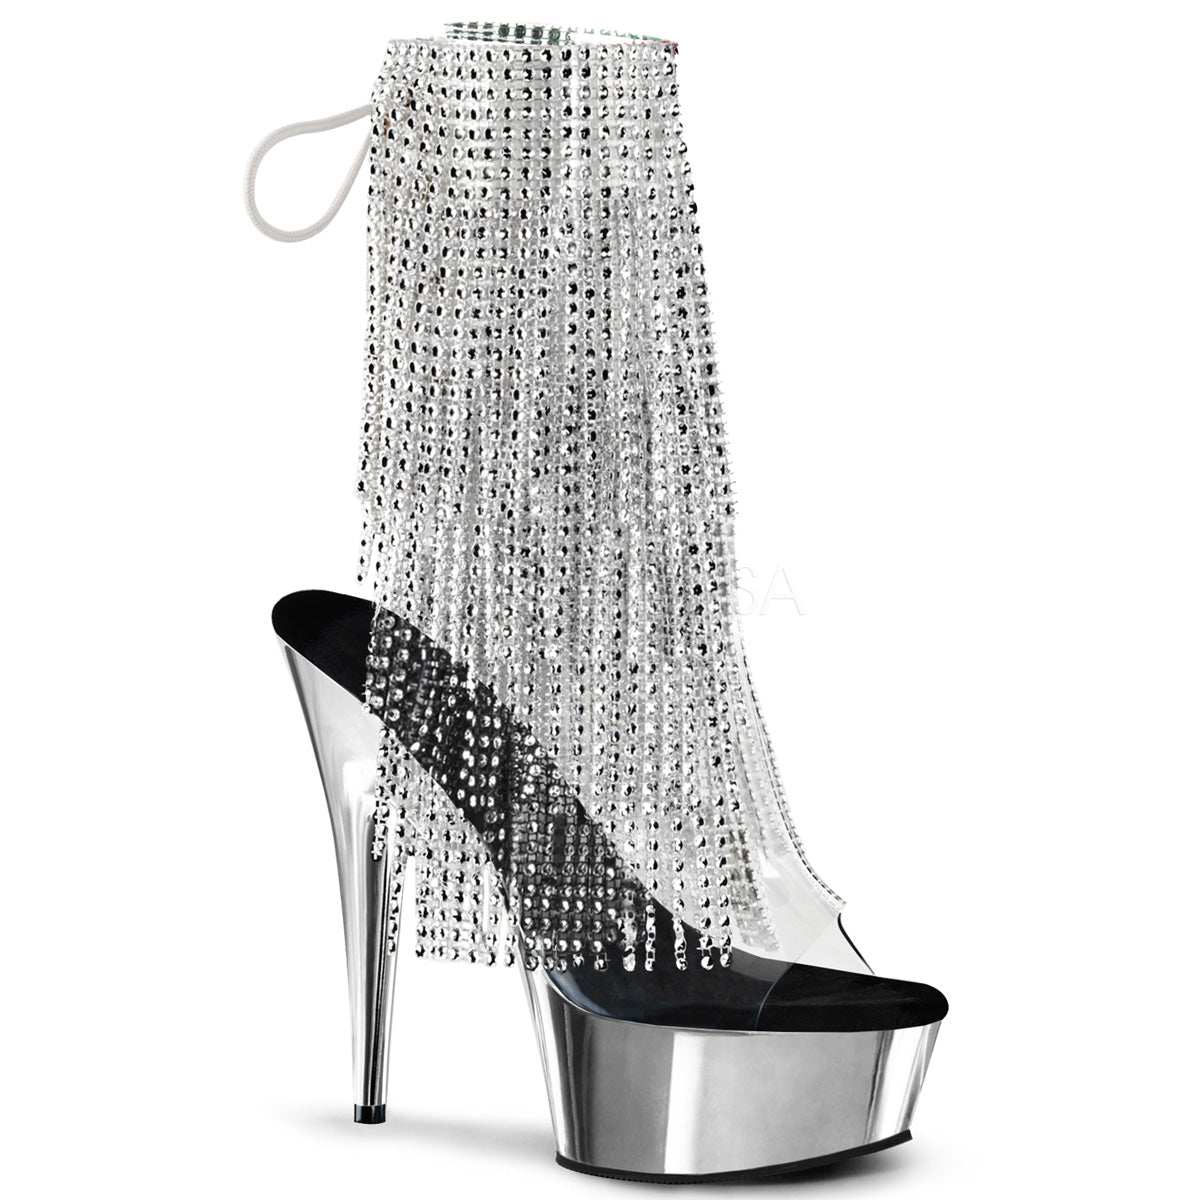 6" Heel DELIGHT-1017RSF Silver Chrome